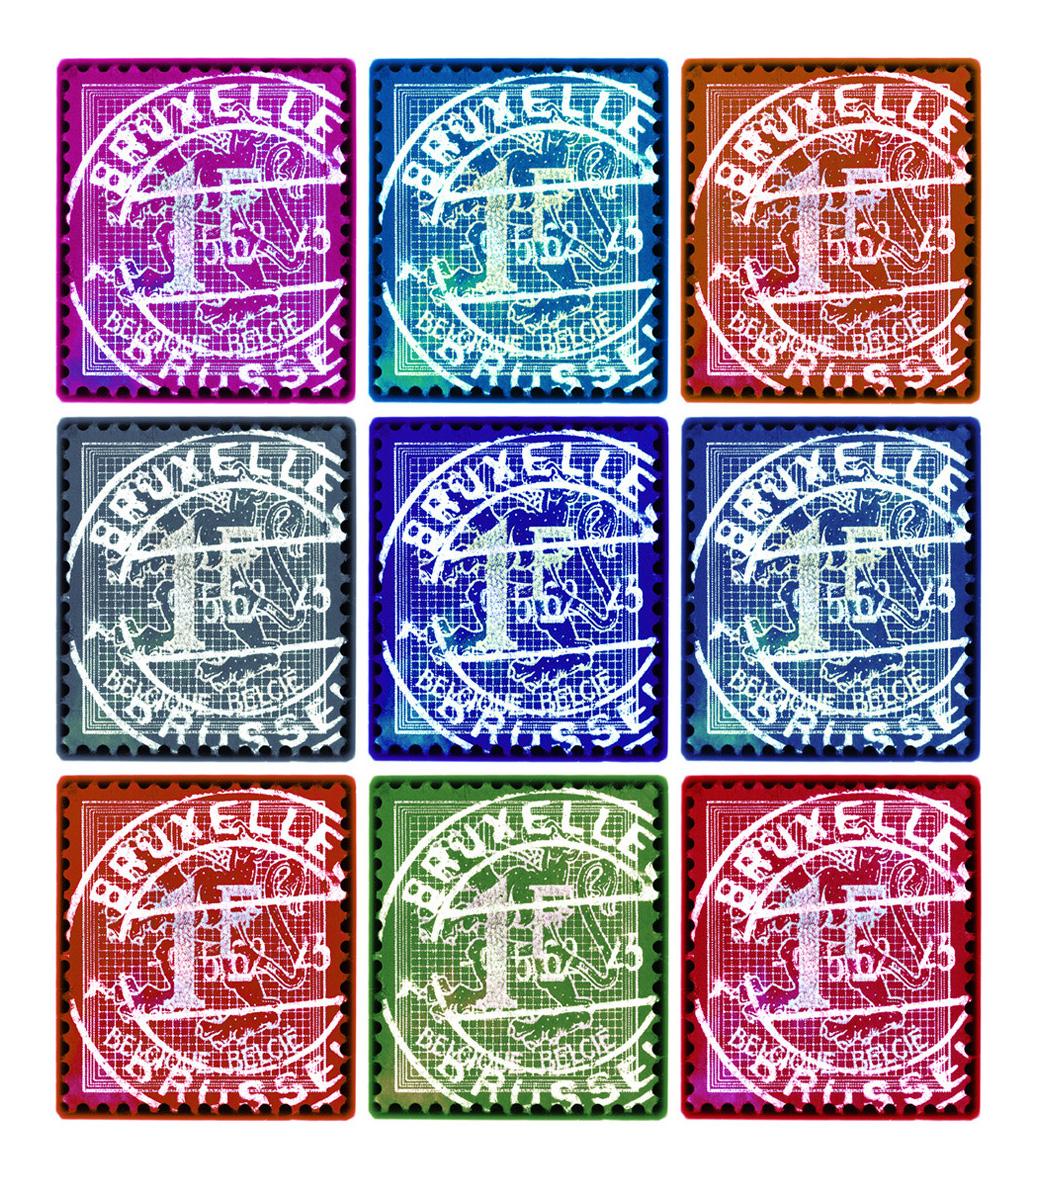 Heidler & Heeps Print - Stamp Collection, Lion of Flanders (Multi-Color Mosaic Brussels Stamps) 